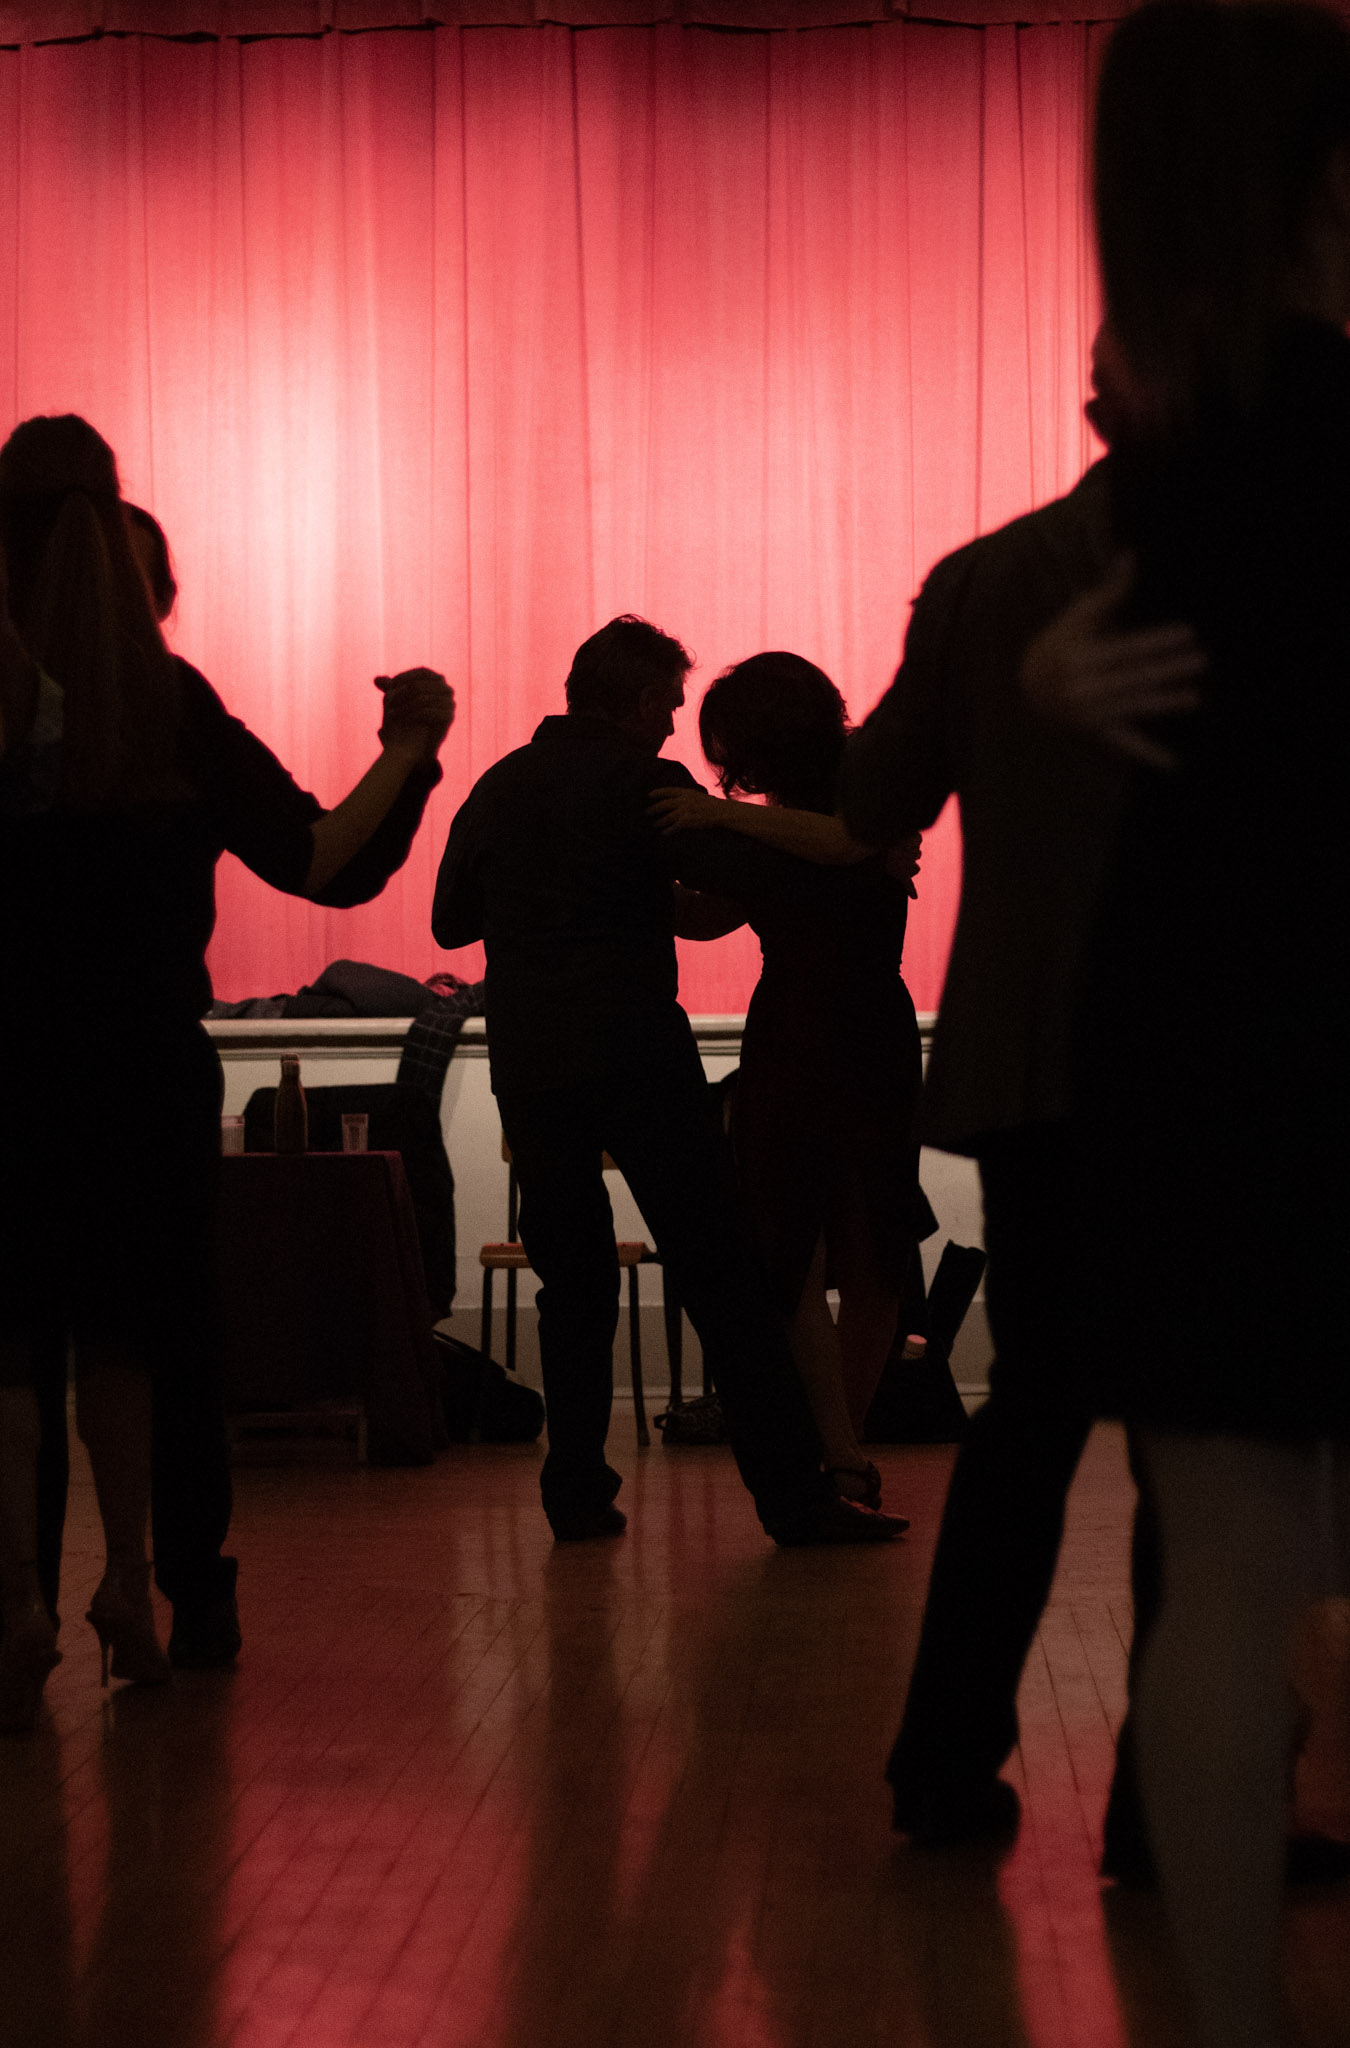  A couple dancing are black silhouettes against the deep red curtain. They are framed by other dancing silhouettes and mirrored by their reflection in the polished floor. 